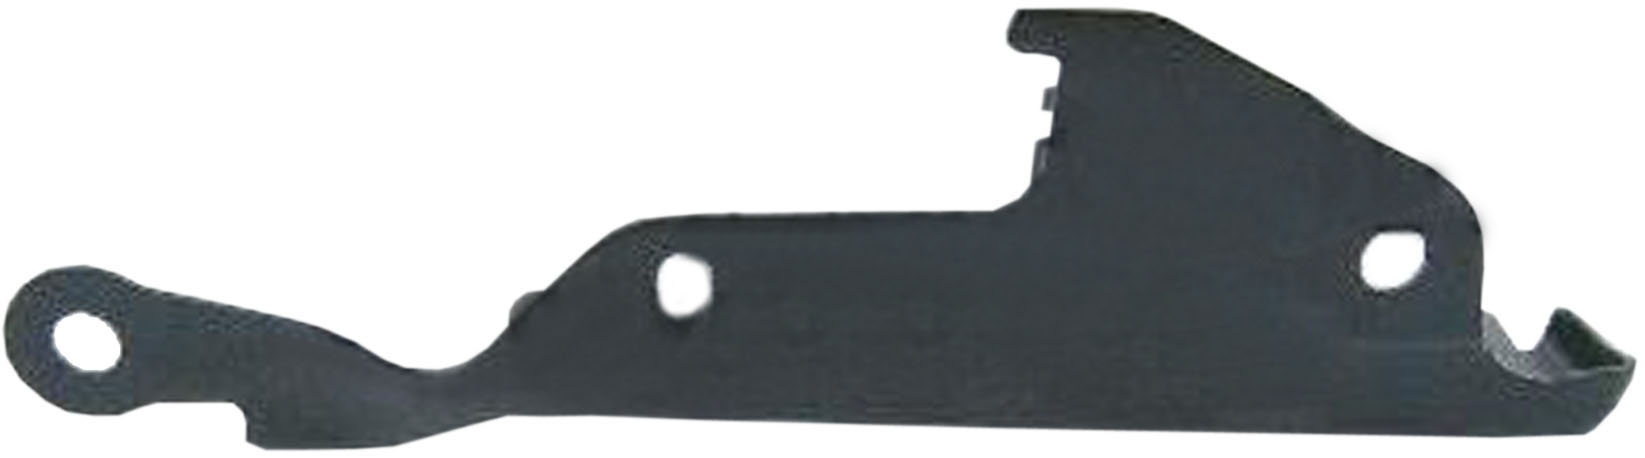 Aftermarket HOOD HINGES for GMC - SIERRA 3500 CLASSIC, SIERRA 3500 CLASSIC,07-07,Hood hinge assy